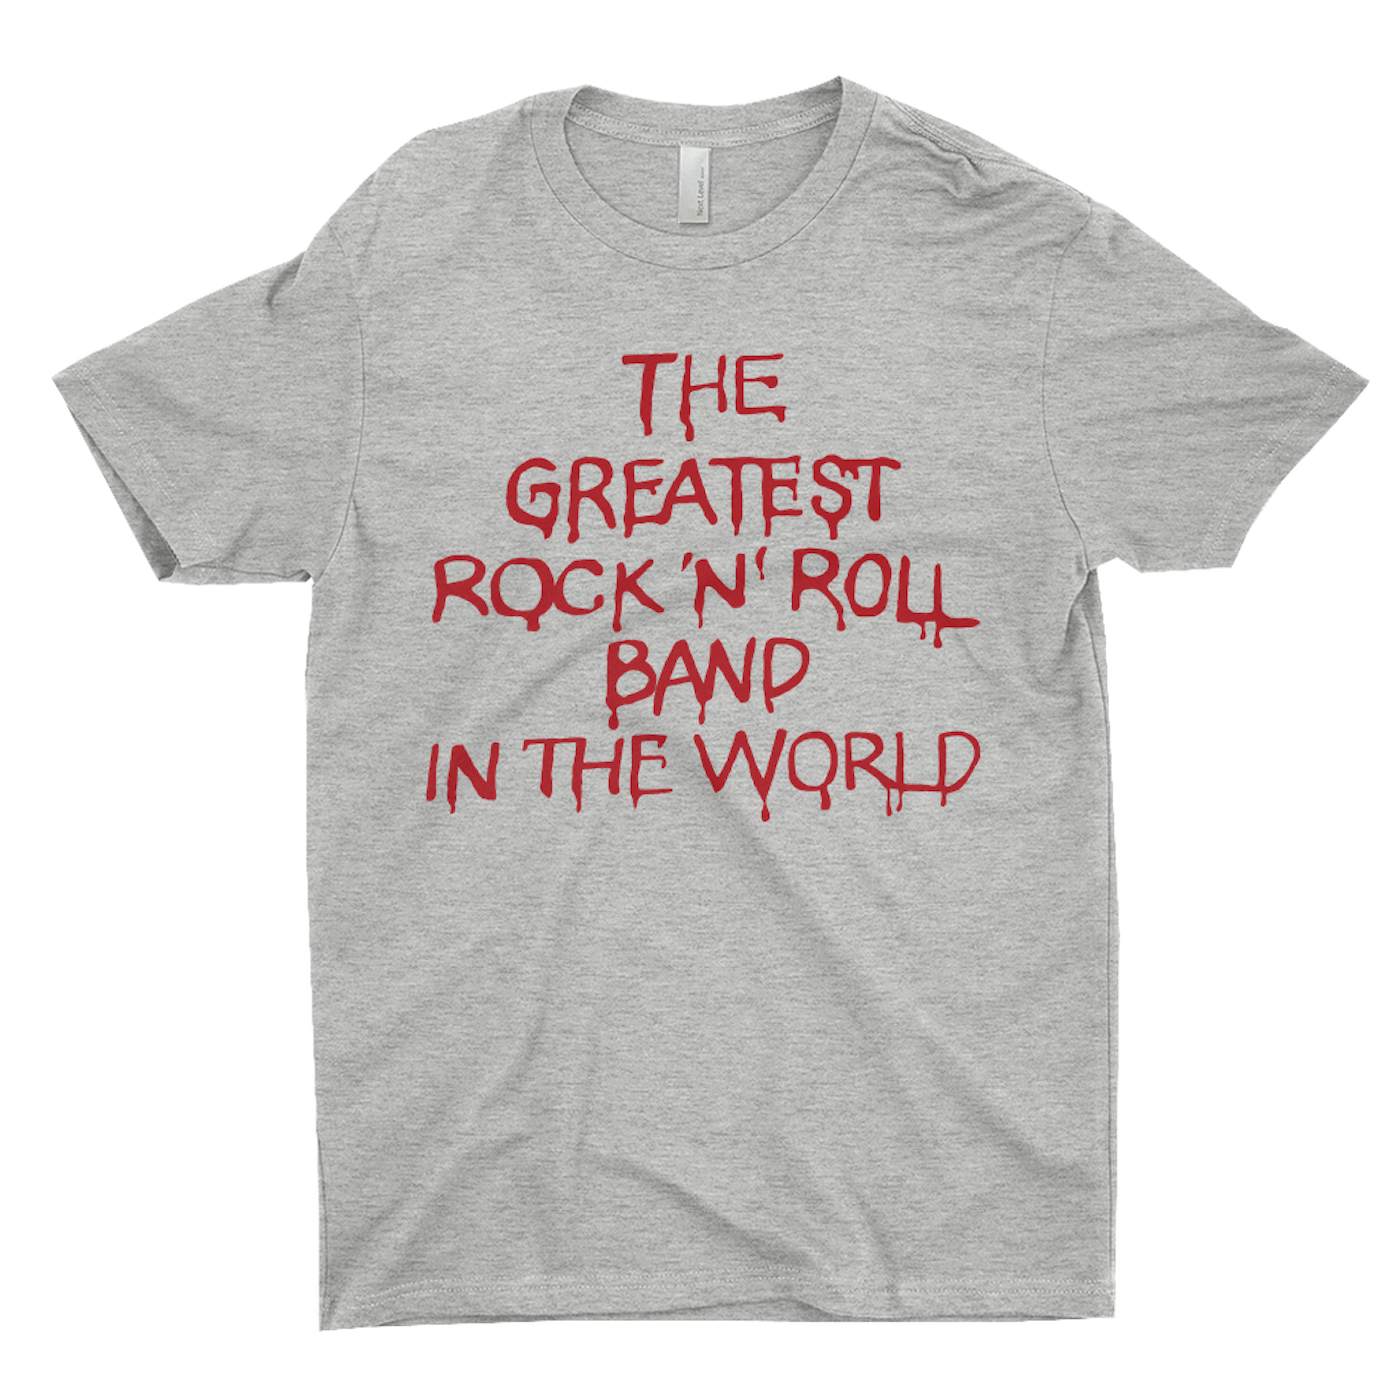 The Who T-Shirt | The Greatest Band Worn By Keith Moon The Who Shirt